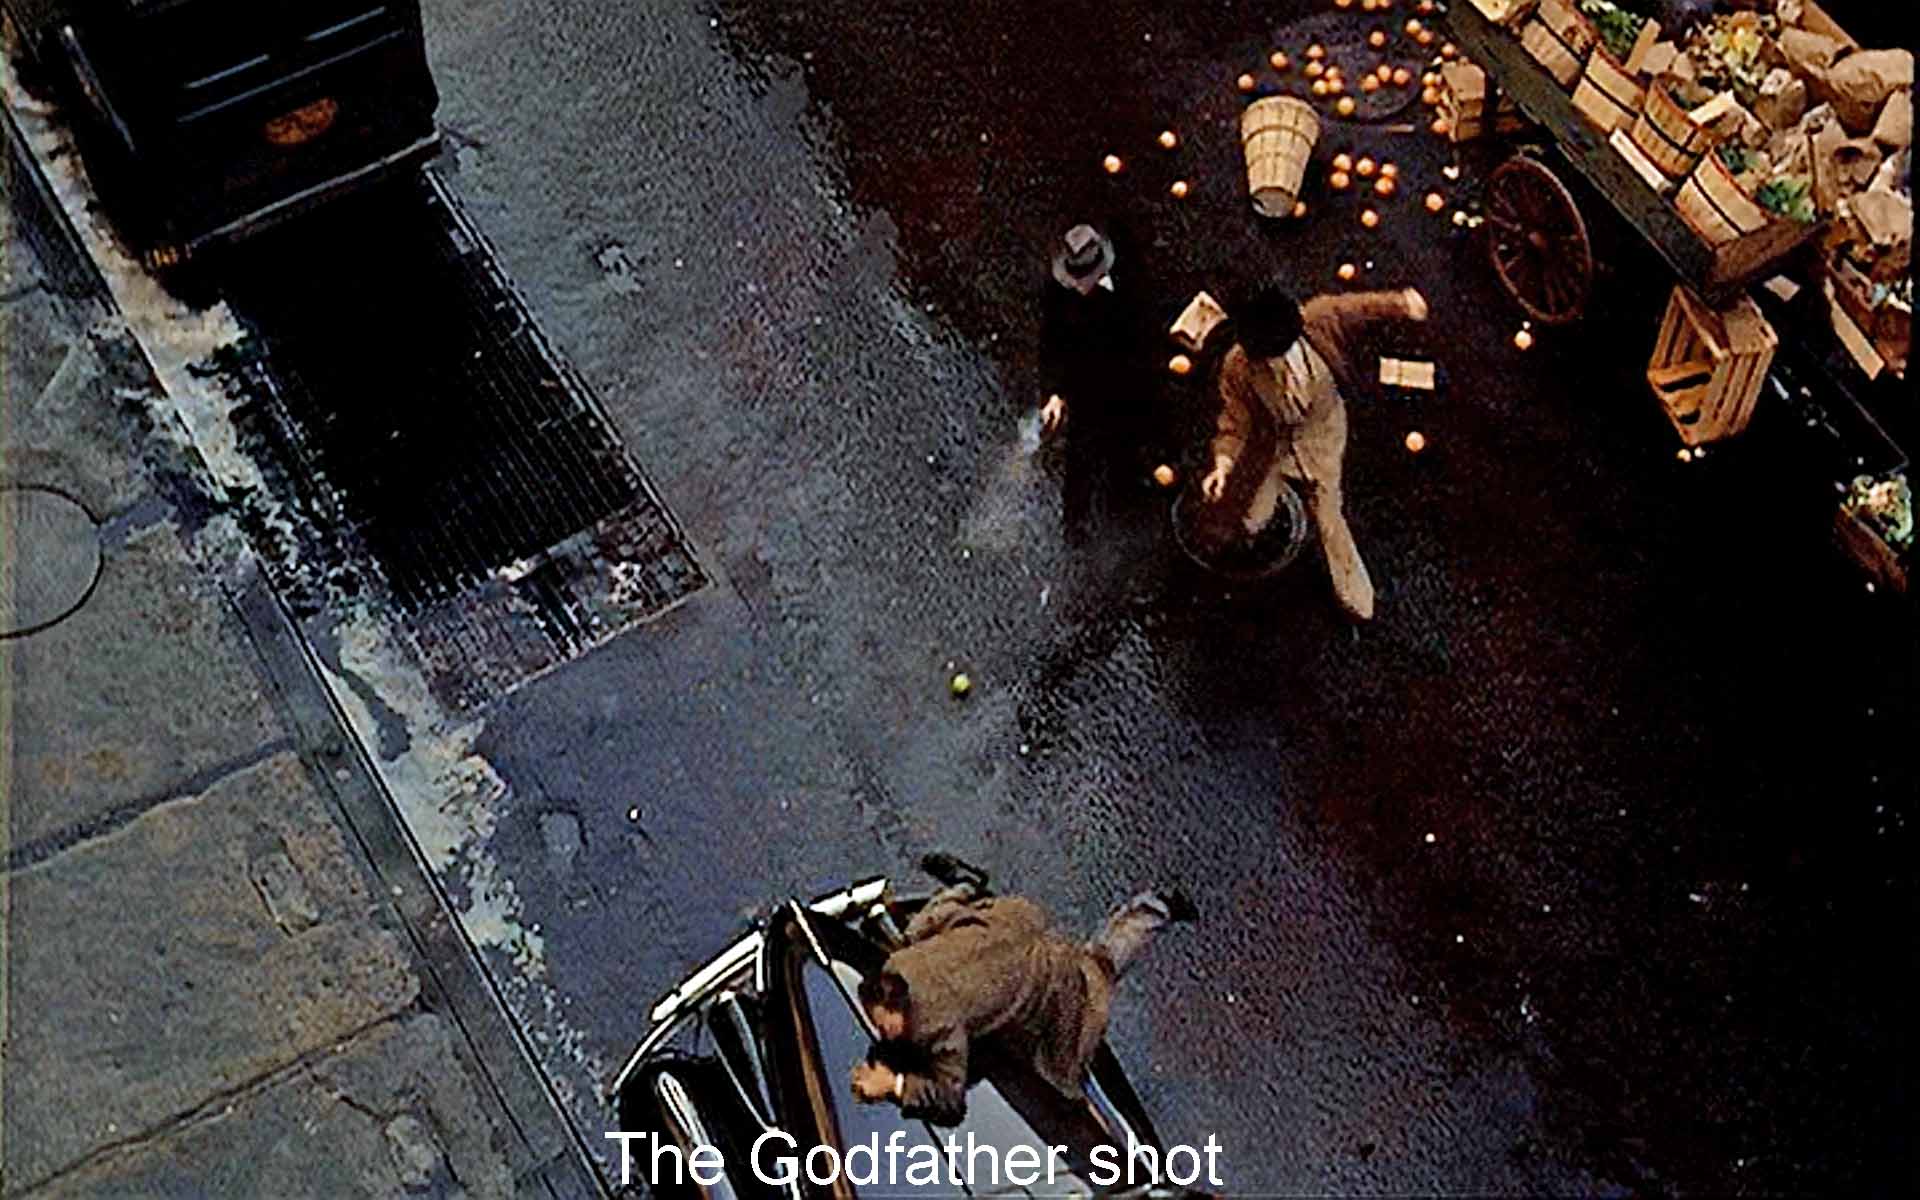 The Godfather shot